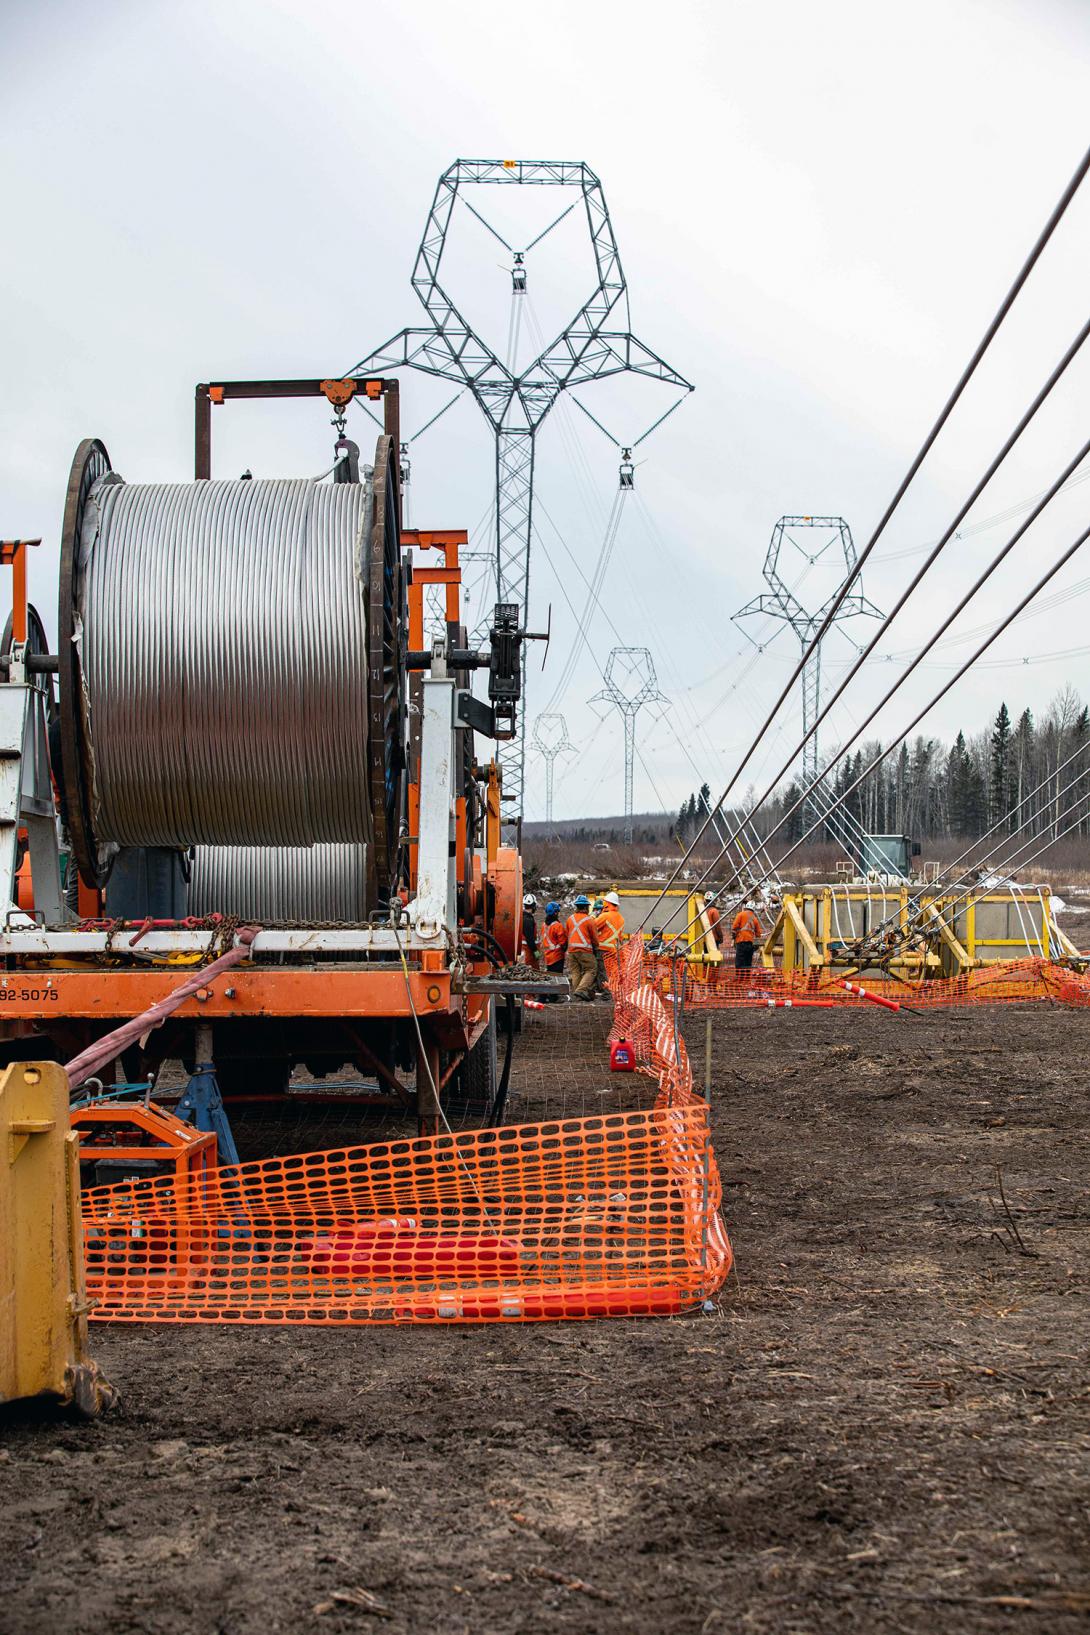 A crew is working on the midspan site of the transmission line. | February 2022